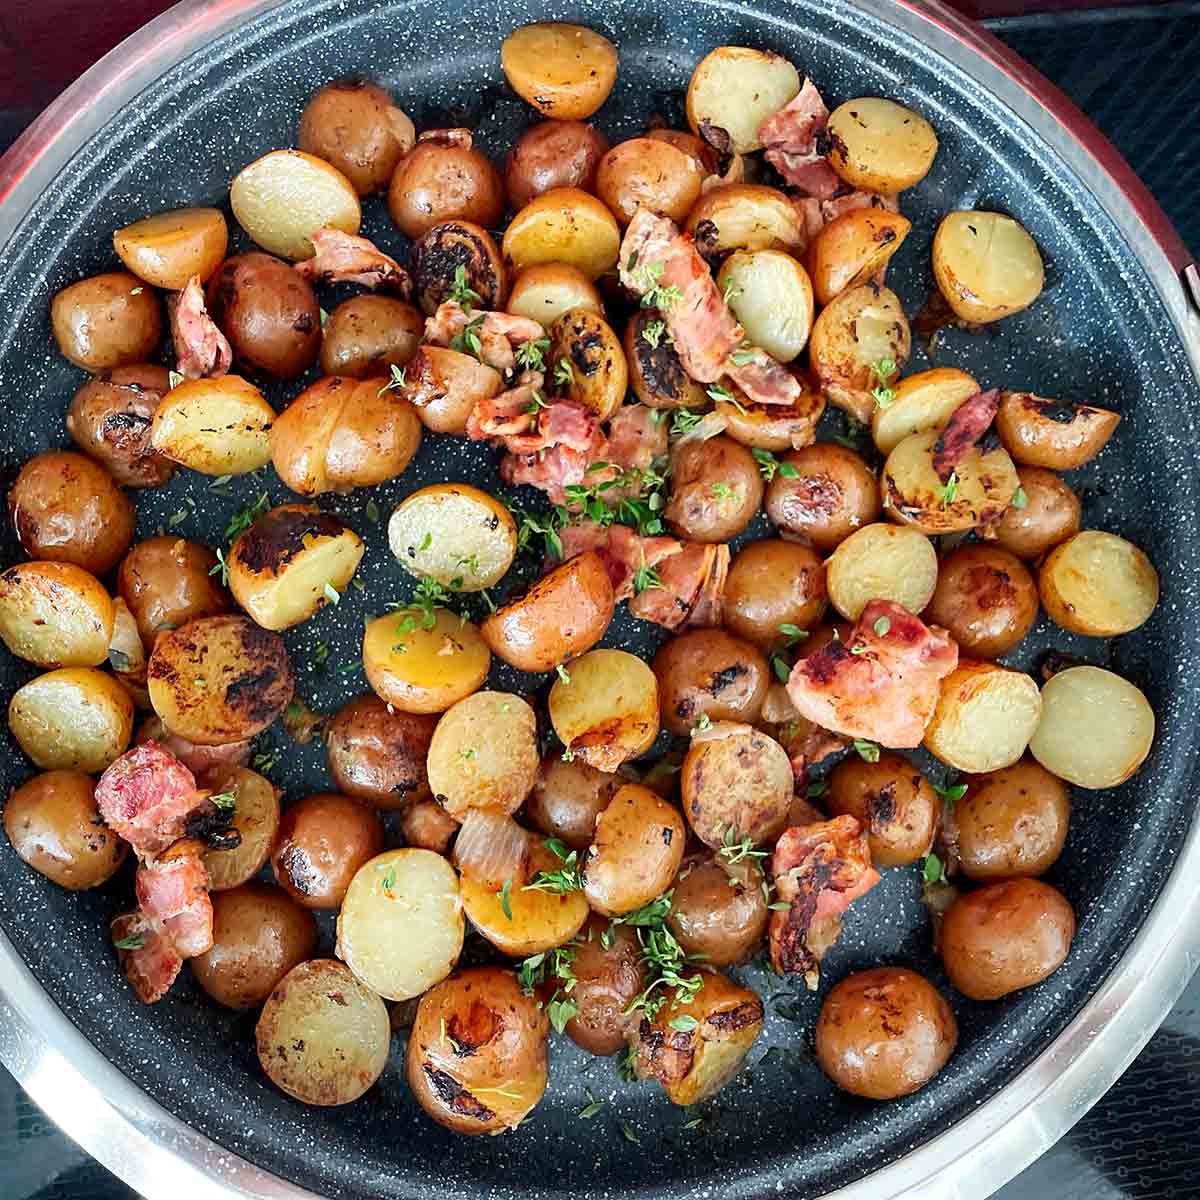 An enamelware bowl filled with braised, halved red potatoes, covered with bacon, onions, and parsley.